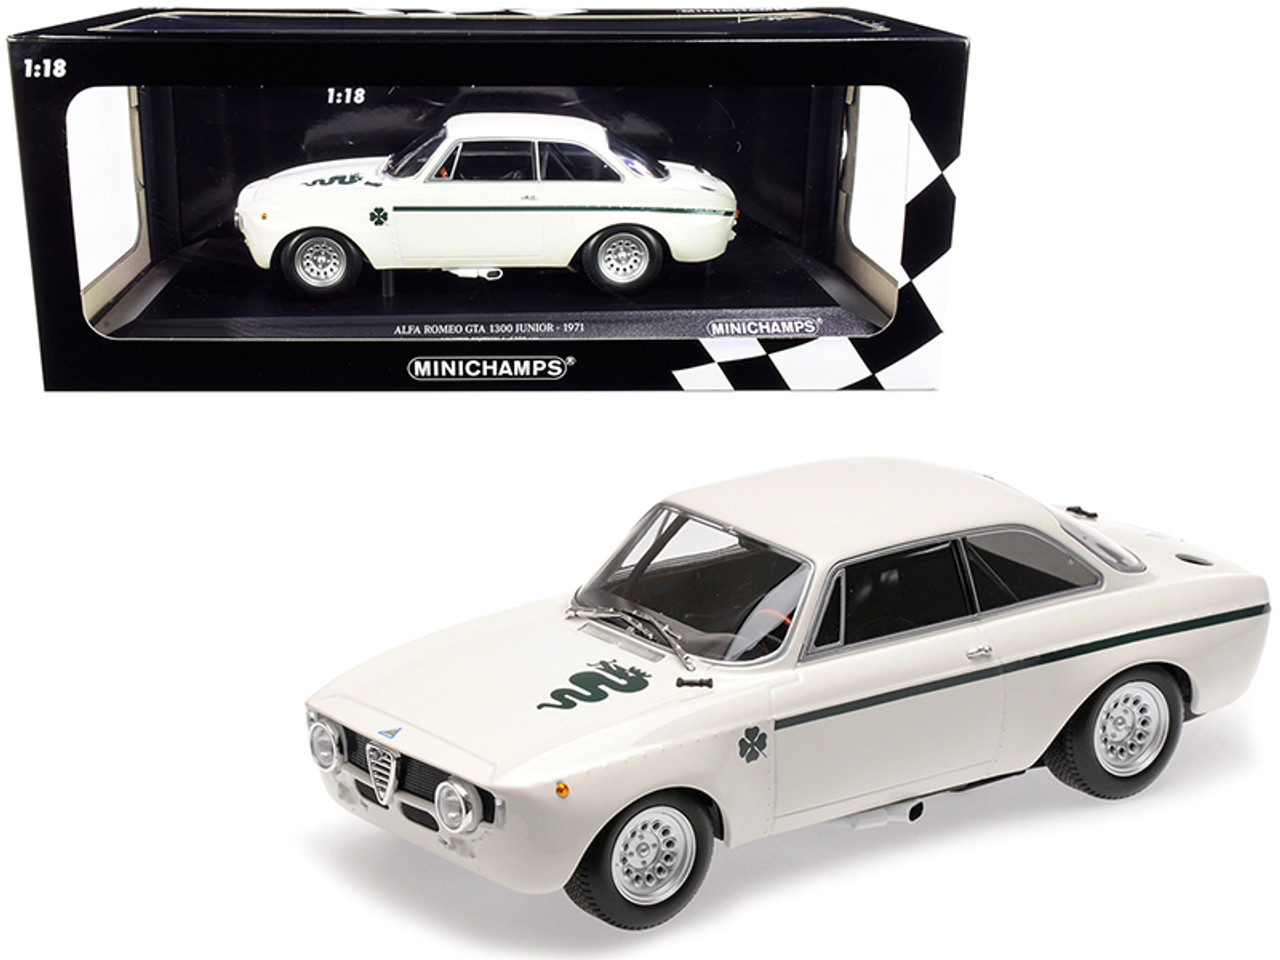 1971 Alfa Romeo GTA 1300 Junior White Limited Edition to 330 pieces Worldwide 1/18 Diecast Model Car by Minichamps